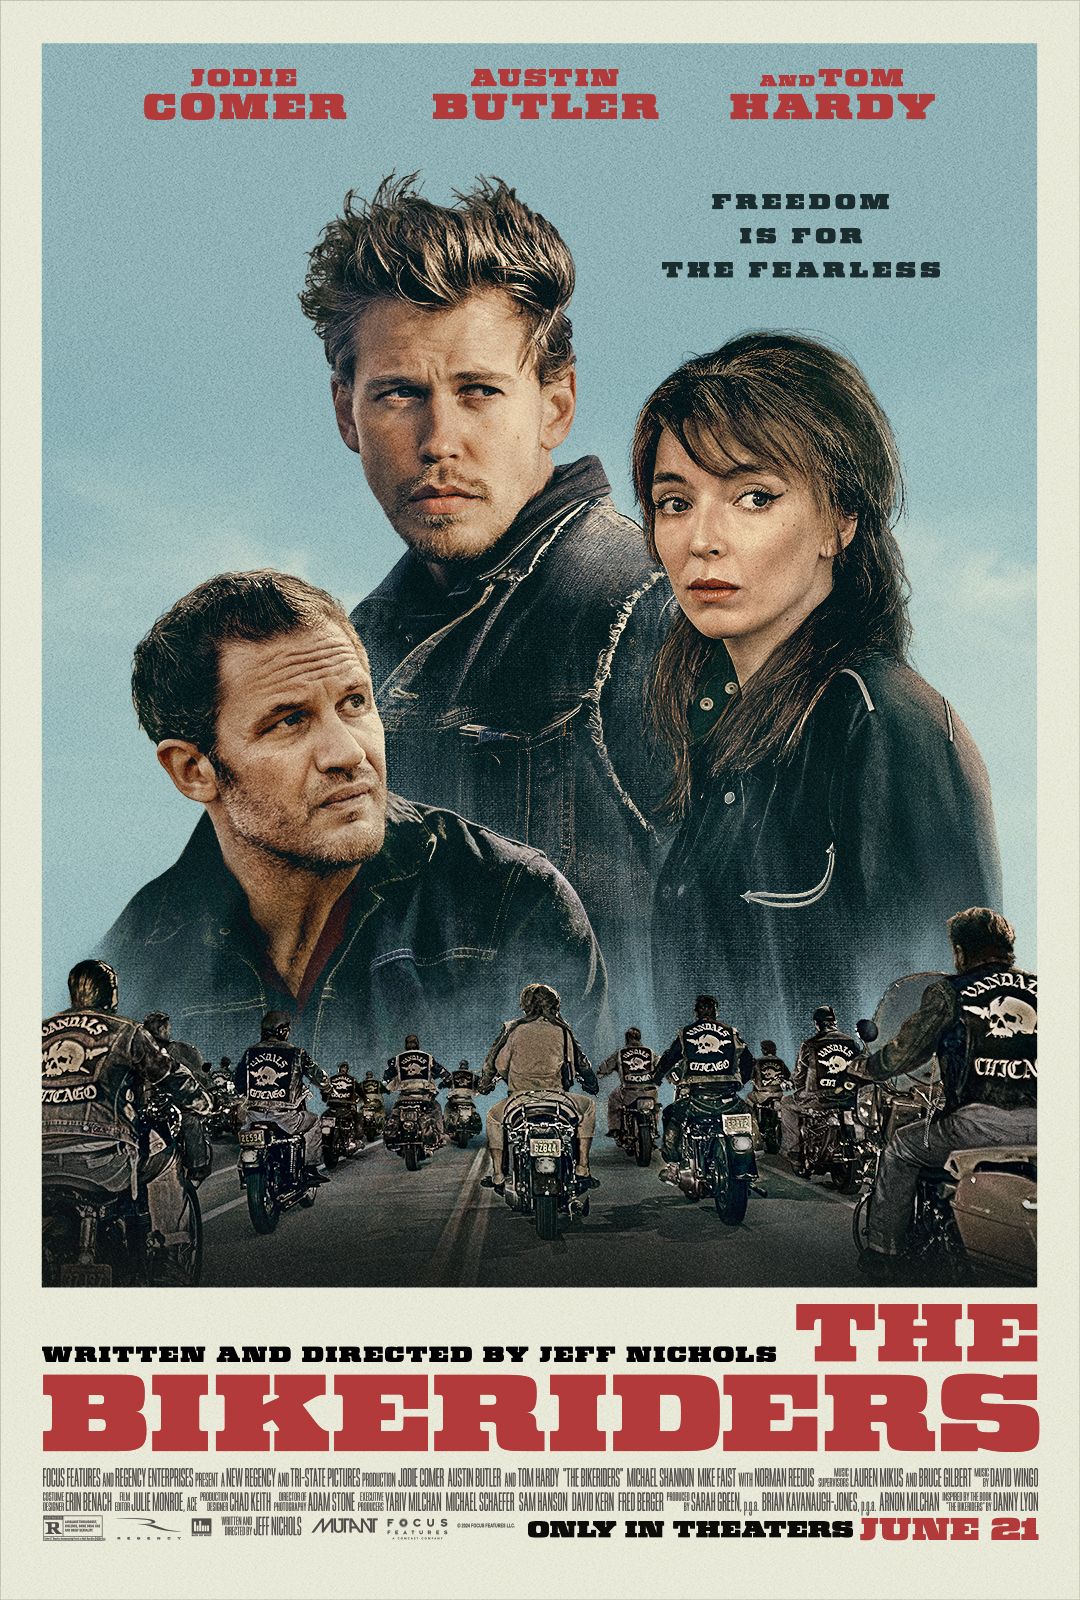 The Bike Riders Movie Poster Showing Jodie Comer, Austin Butler, and Tom Hardy With a Motorcycle Gang